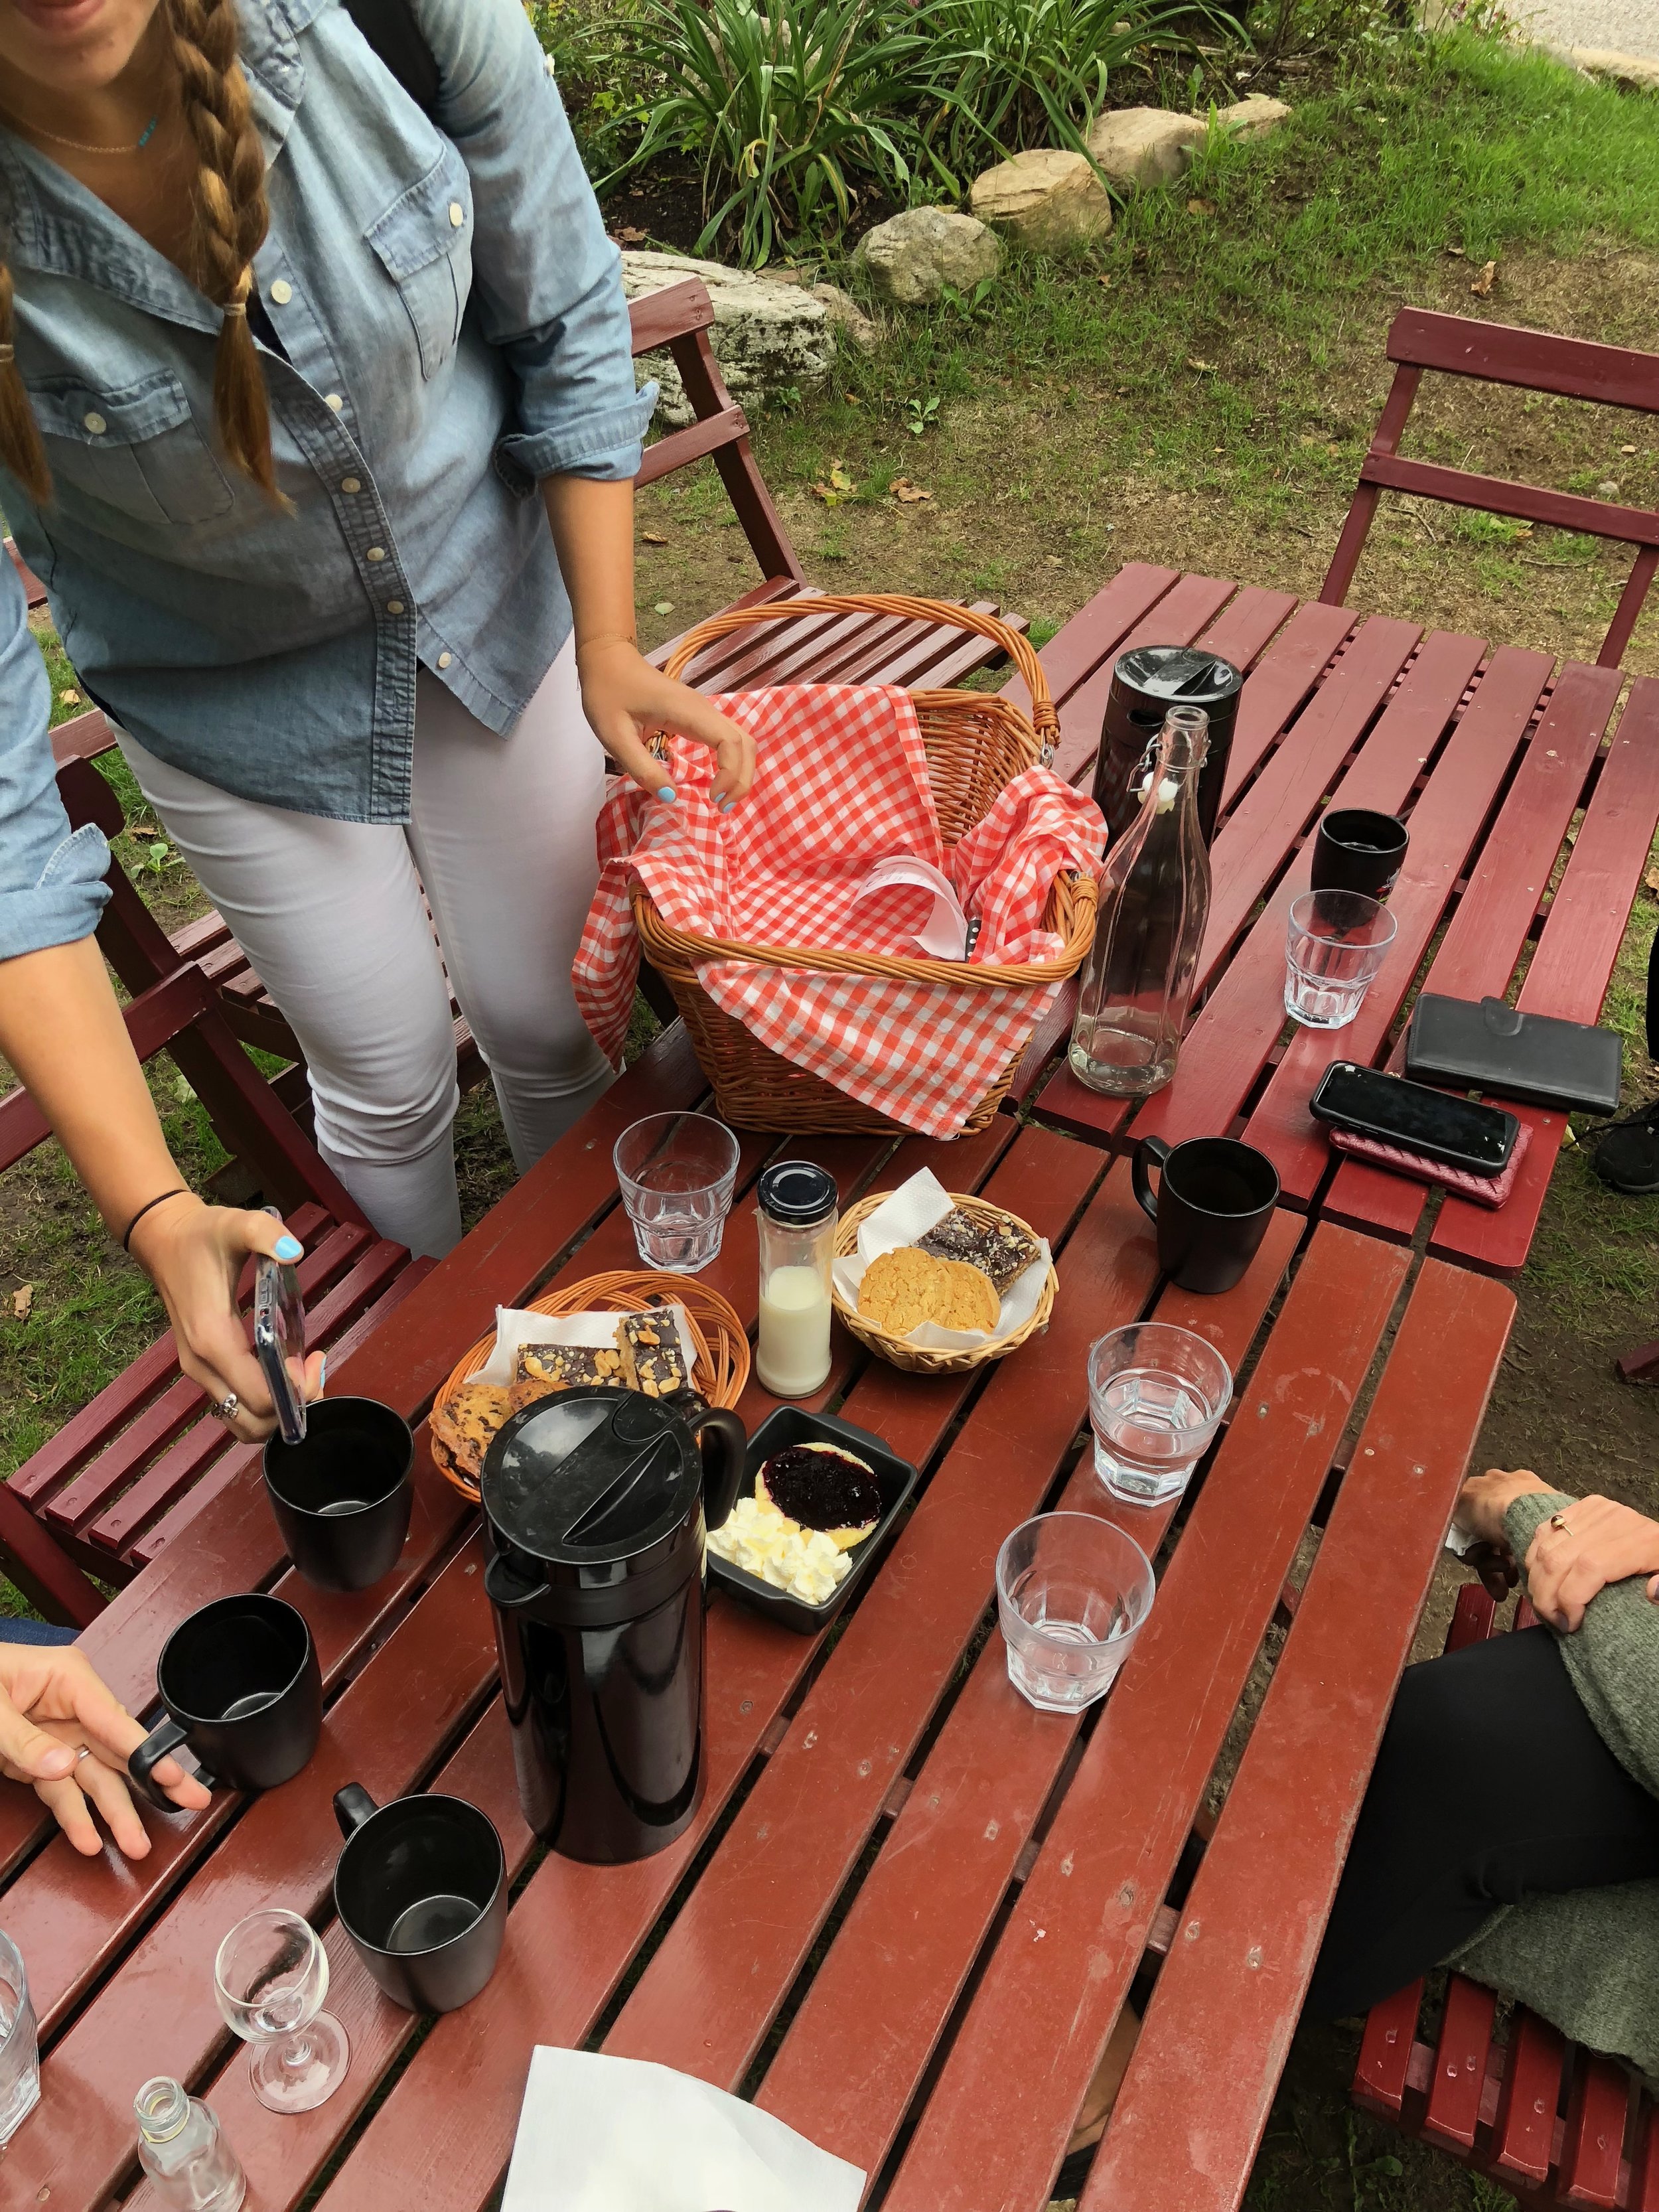 Time for fika, which arrives in a picnic basket!